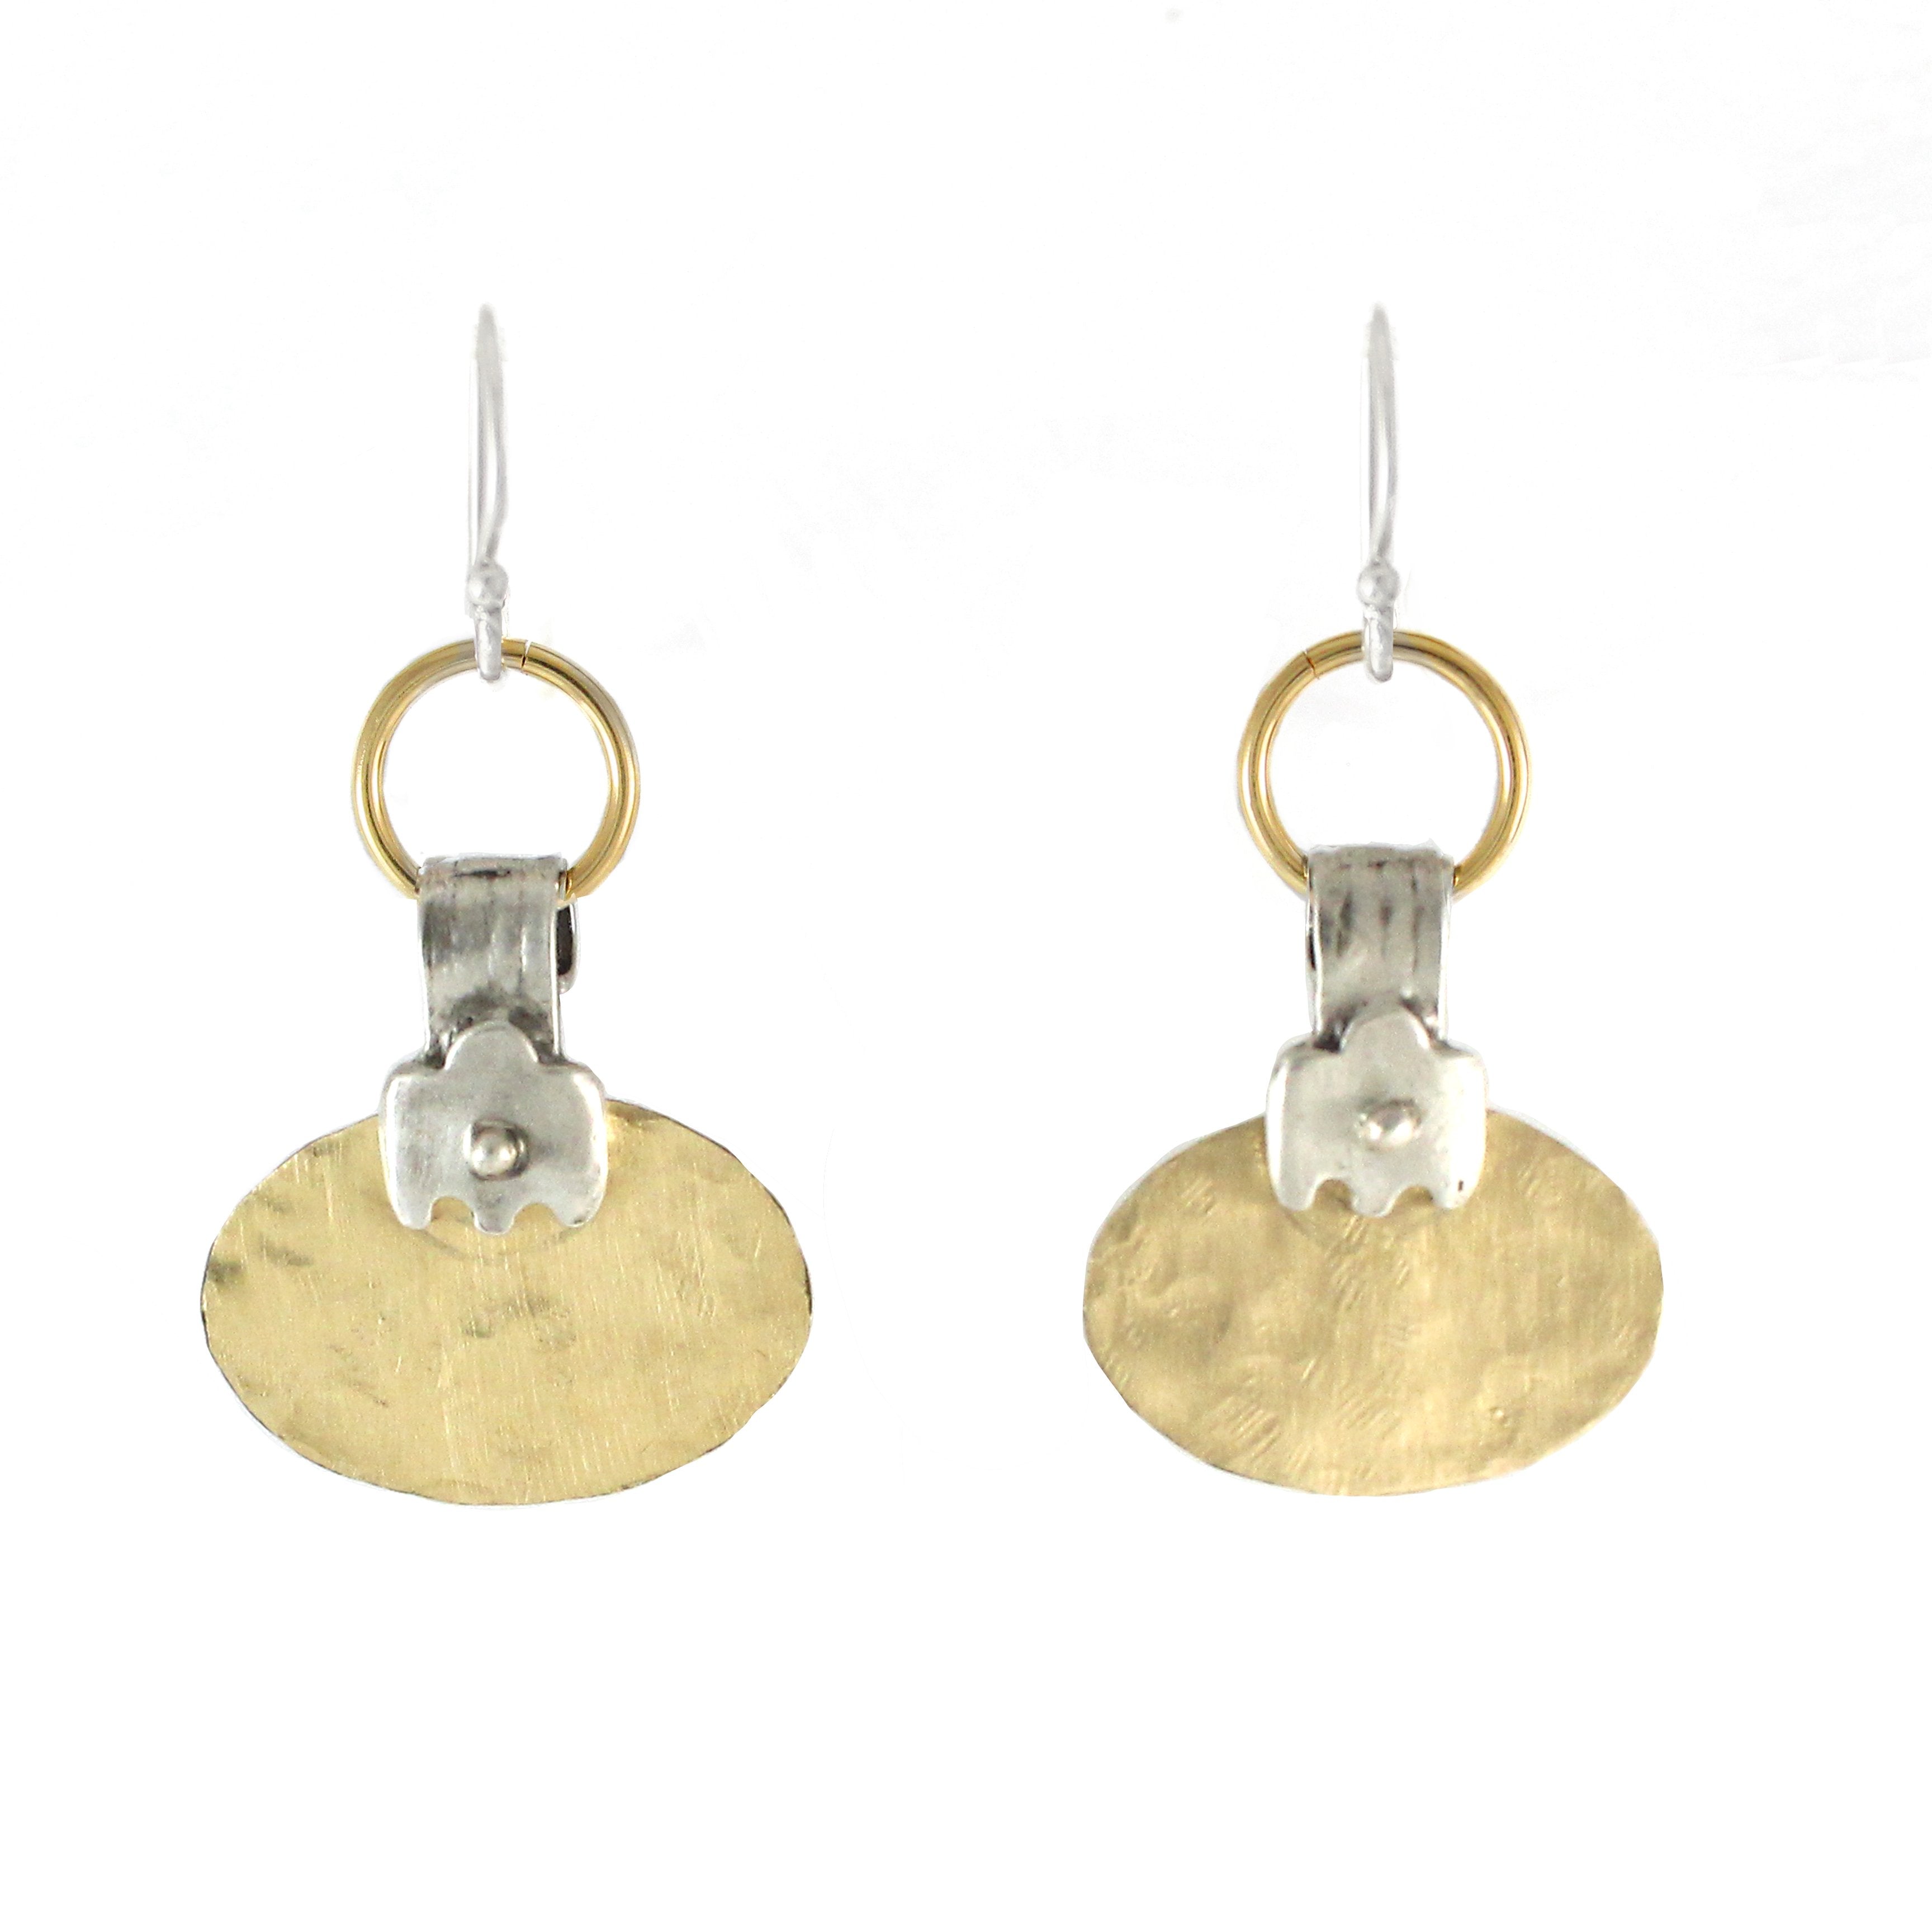 Western Moroccan Style Silver & Goldfield Medium-Small Earrings - Shulamit Kanter